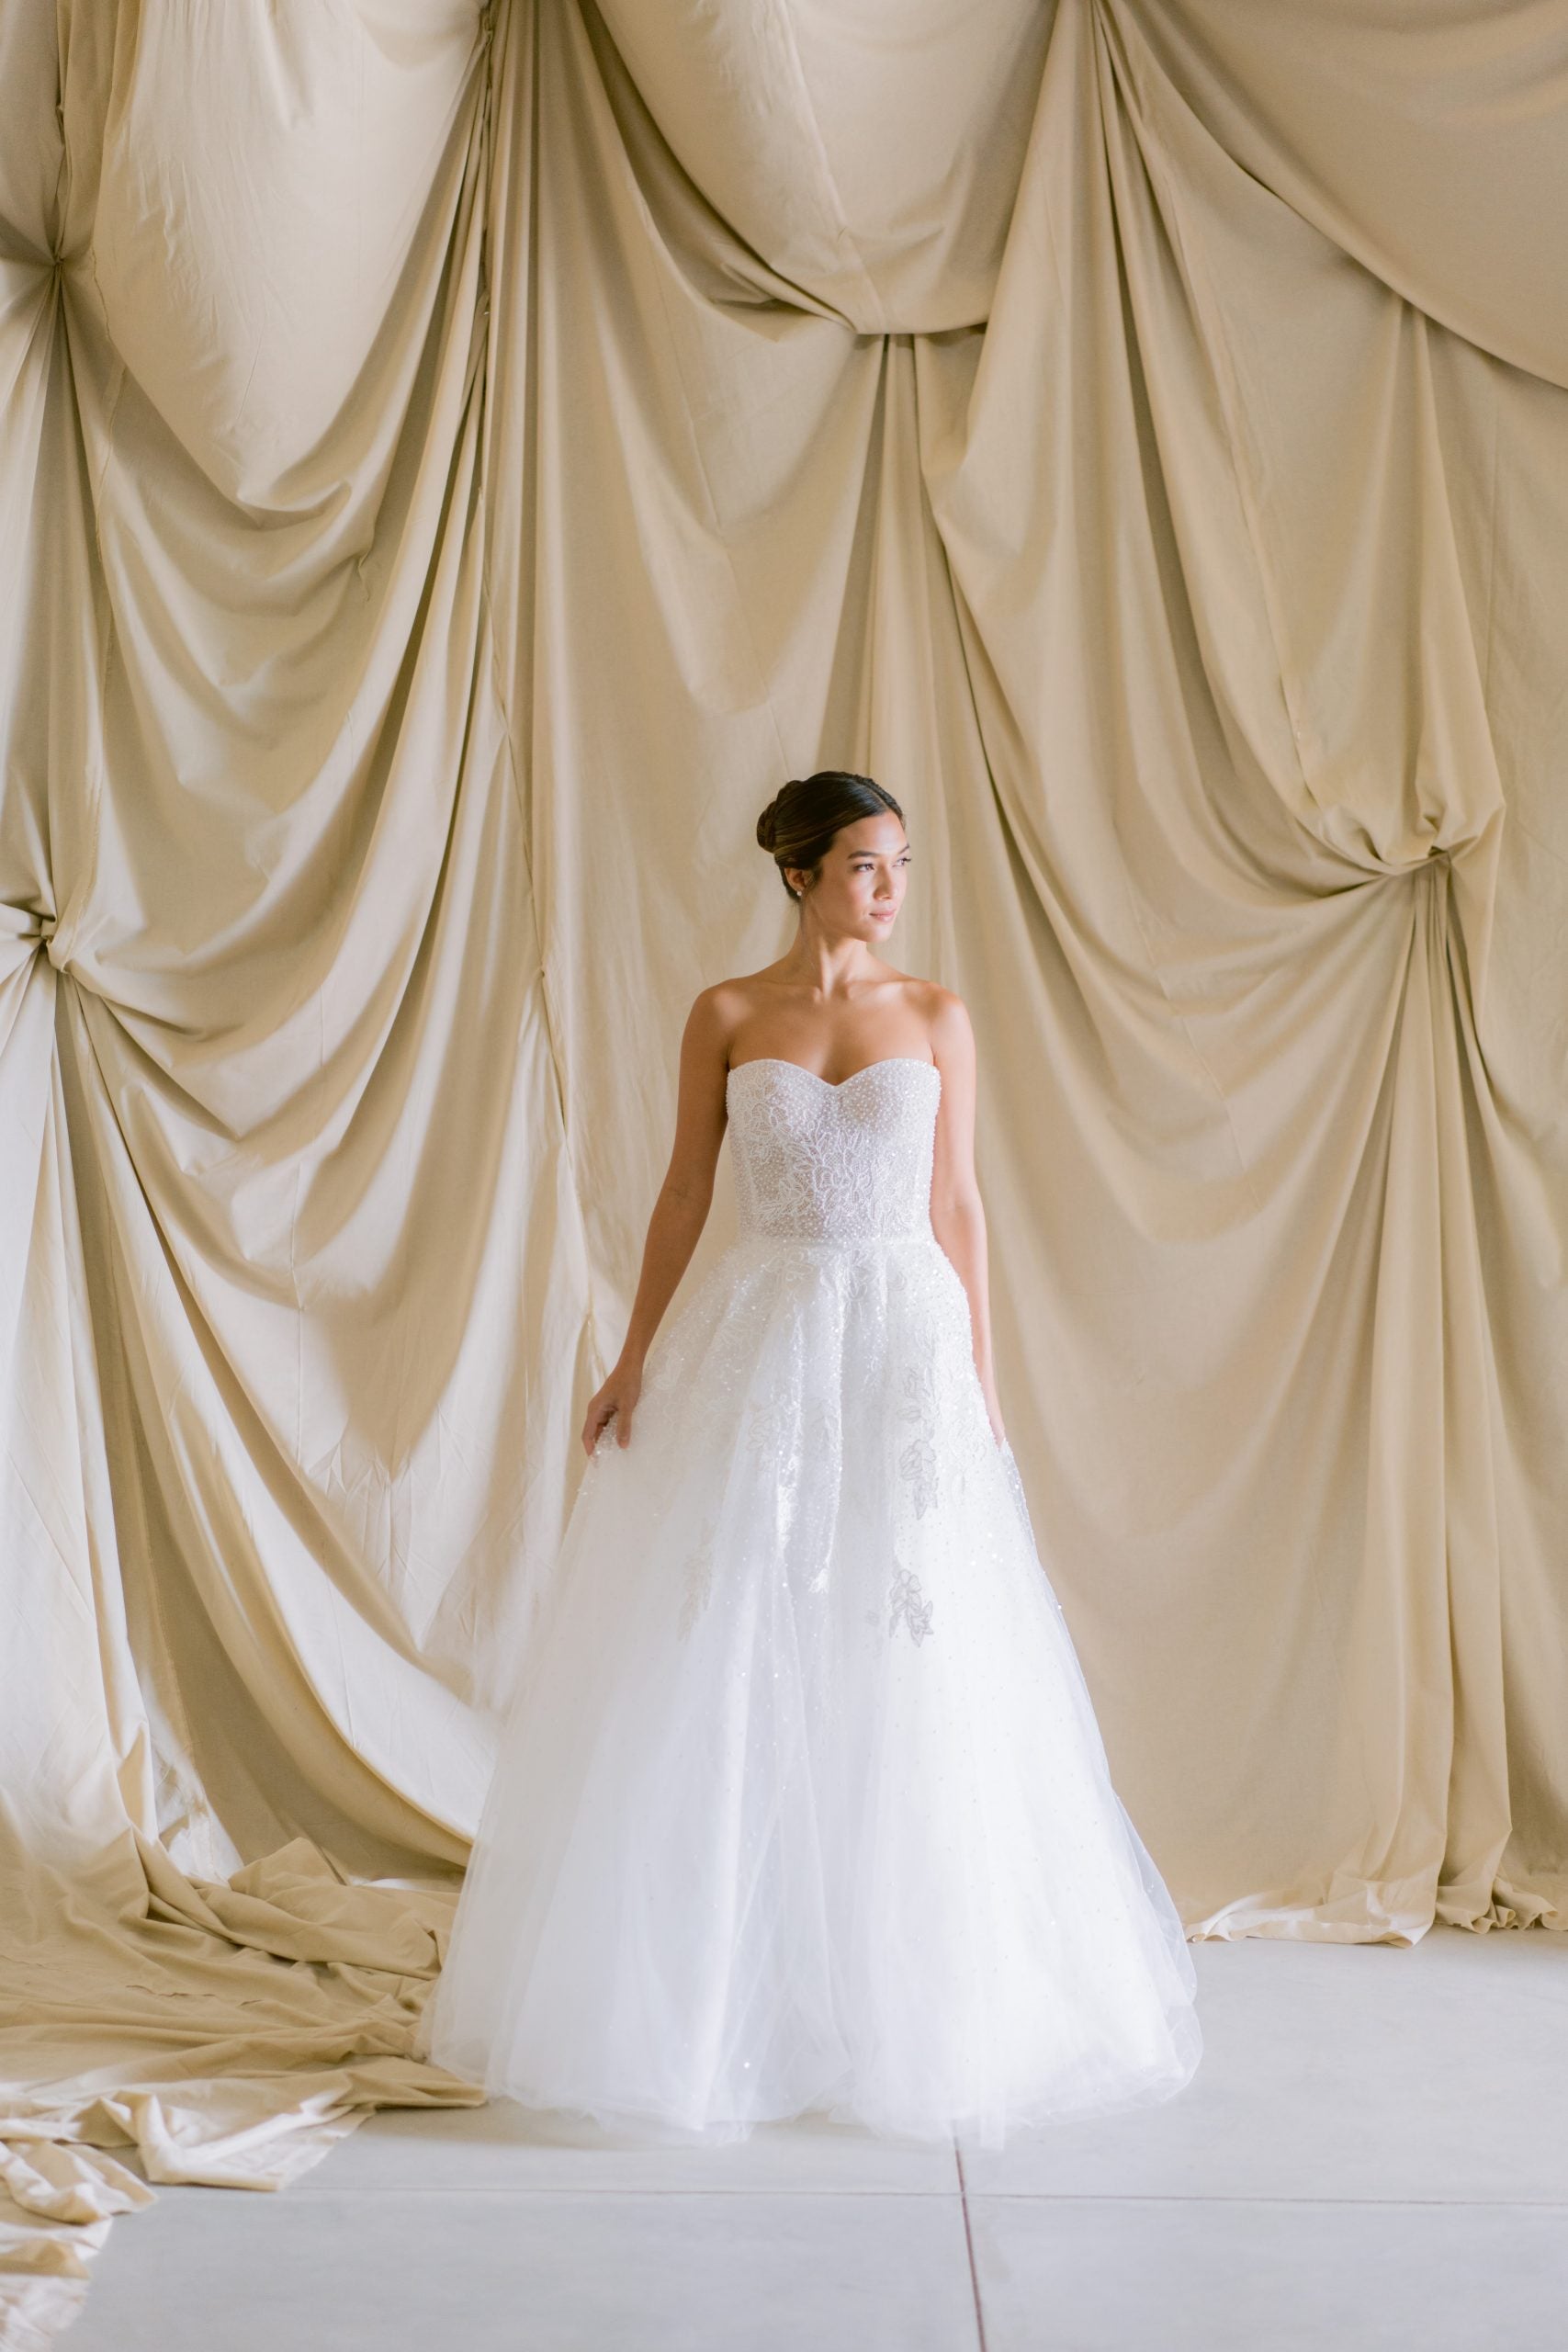 Wedding Dress Shapes and Styles for Brides with a Small Bust